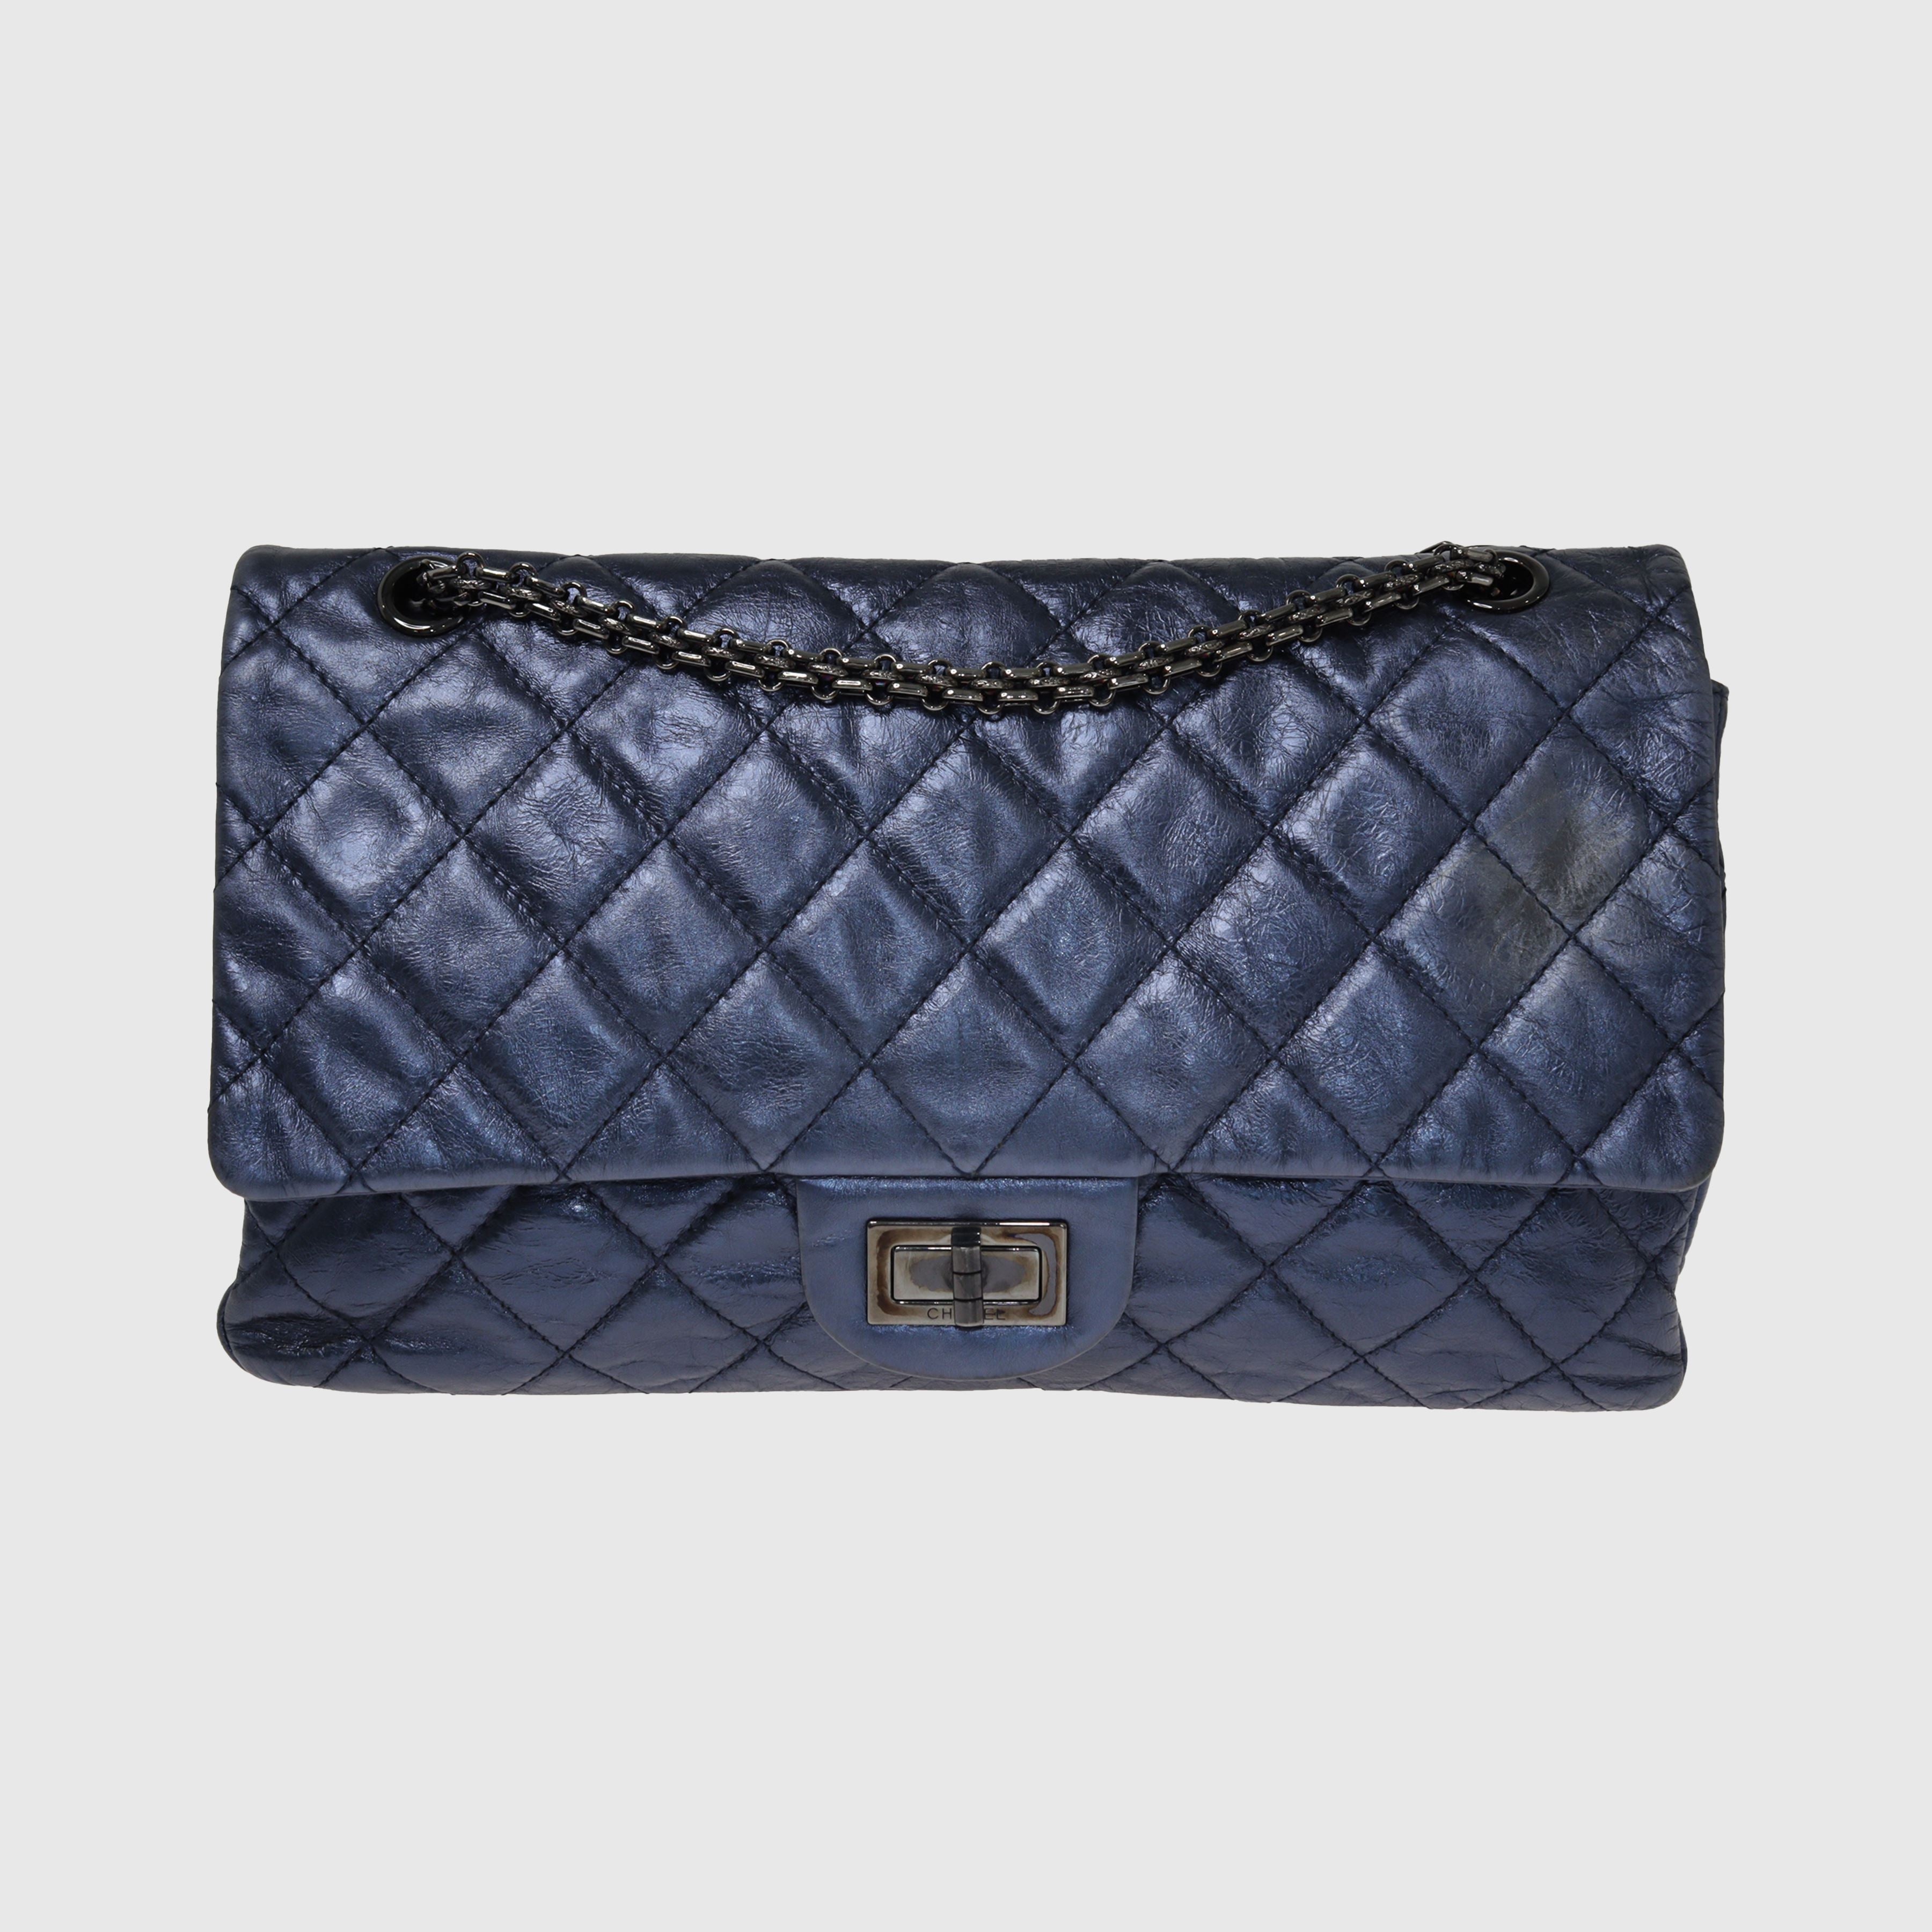 Metallic Blue Quilted Reissue 2.55 Classic 227 Double Flap Bag Bags Chanel 